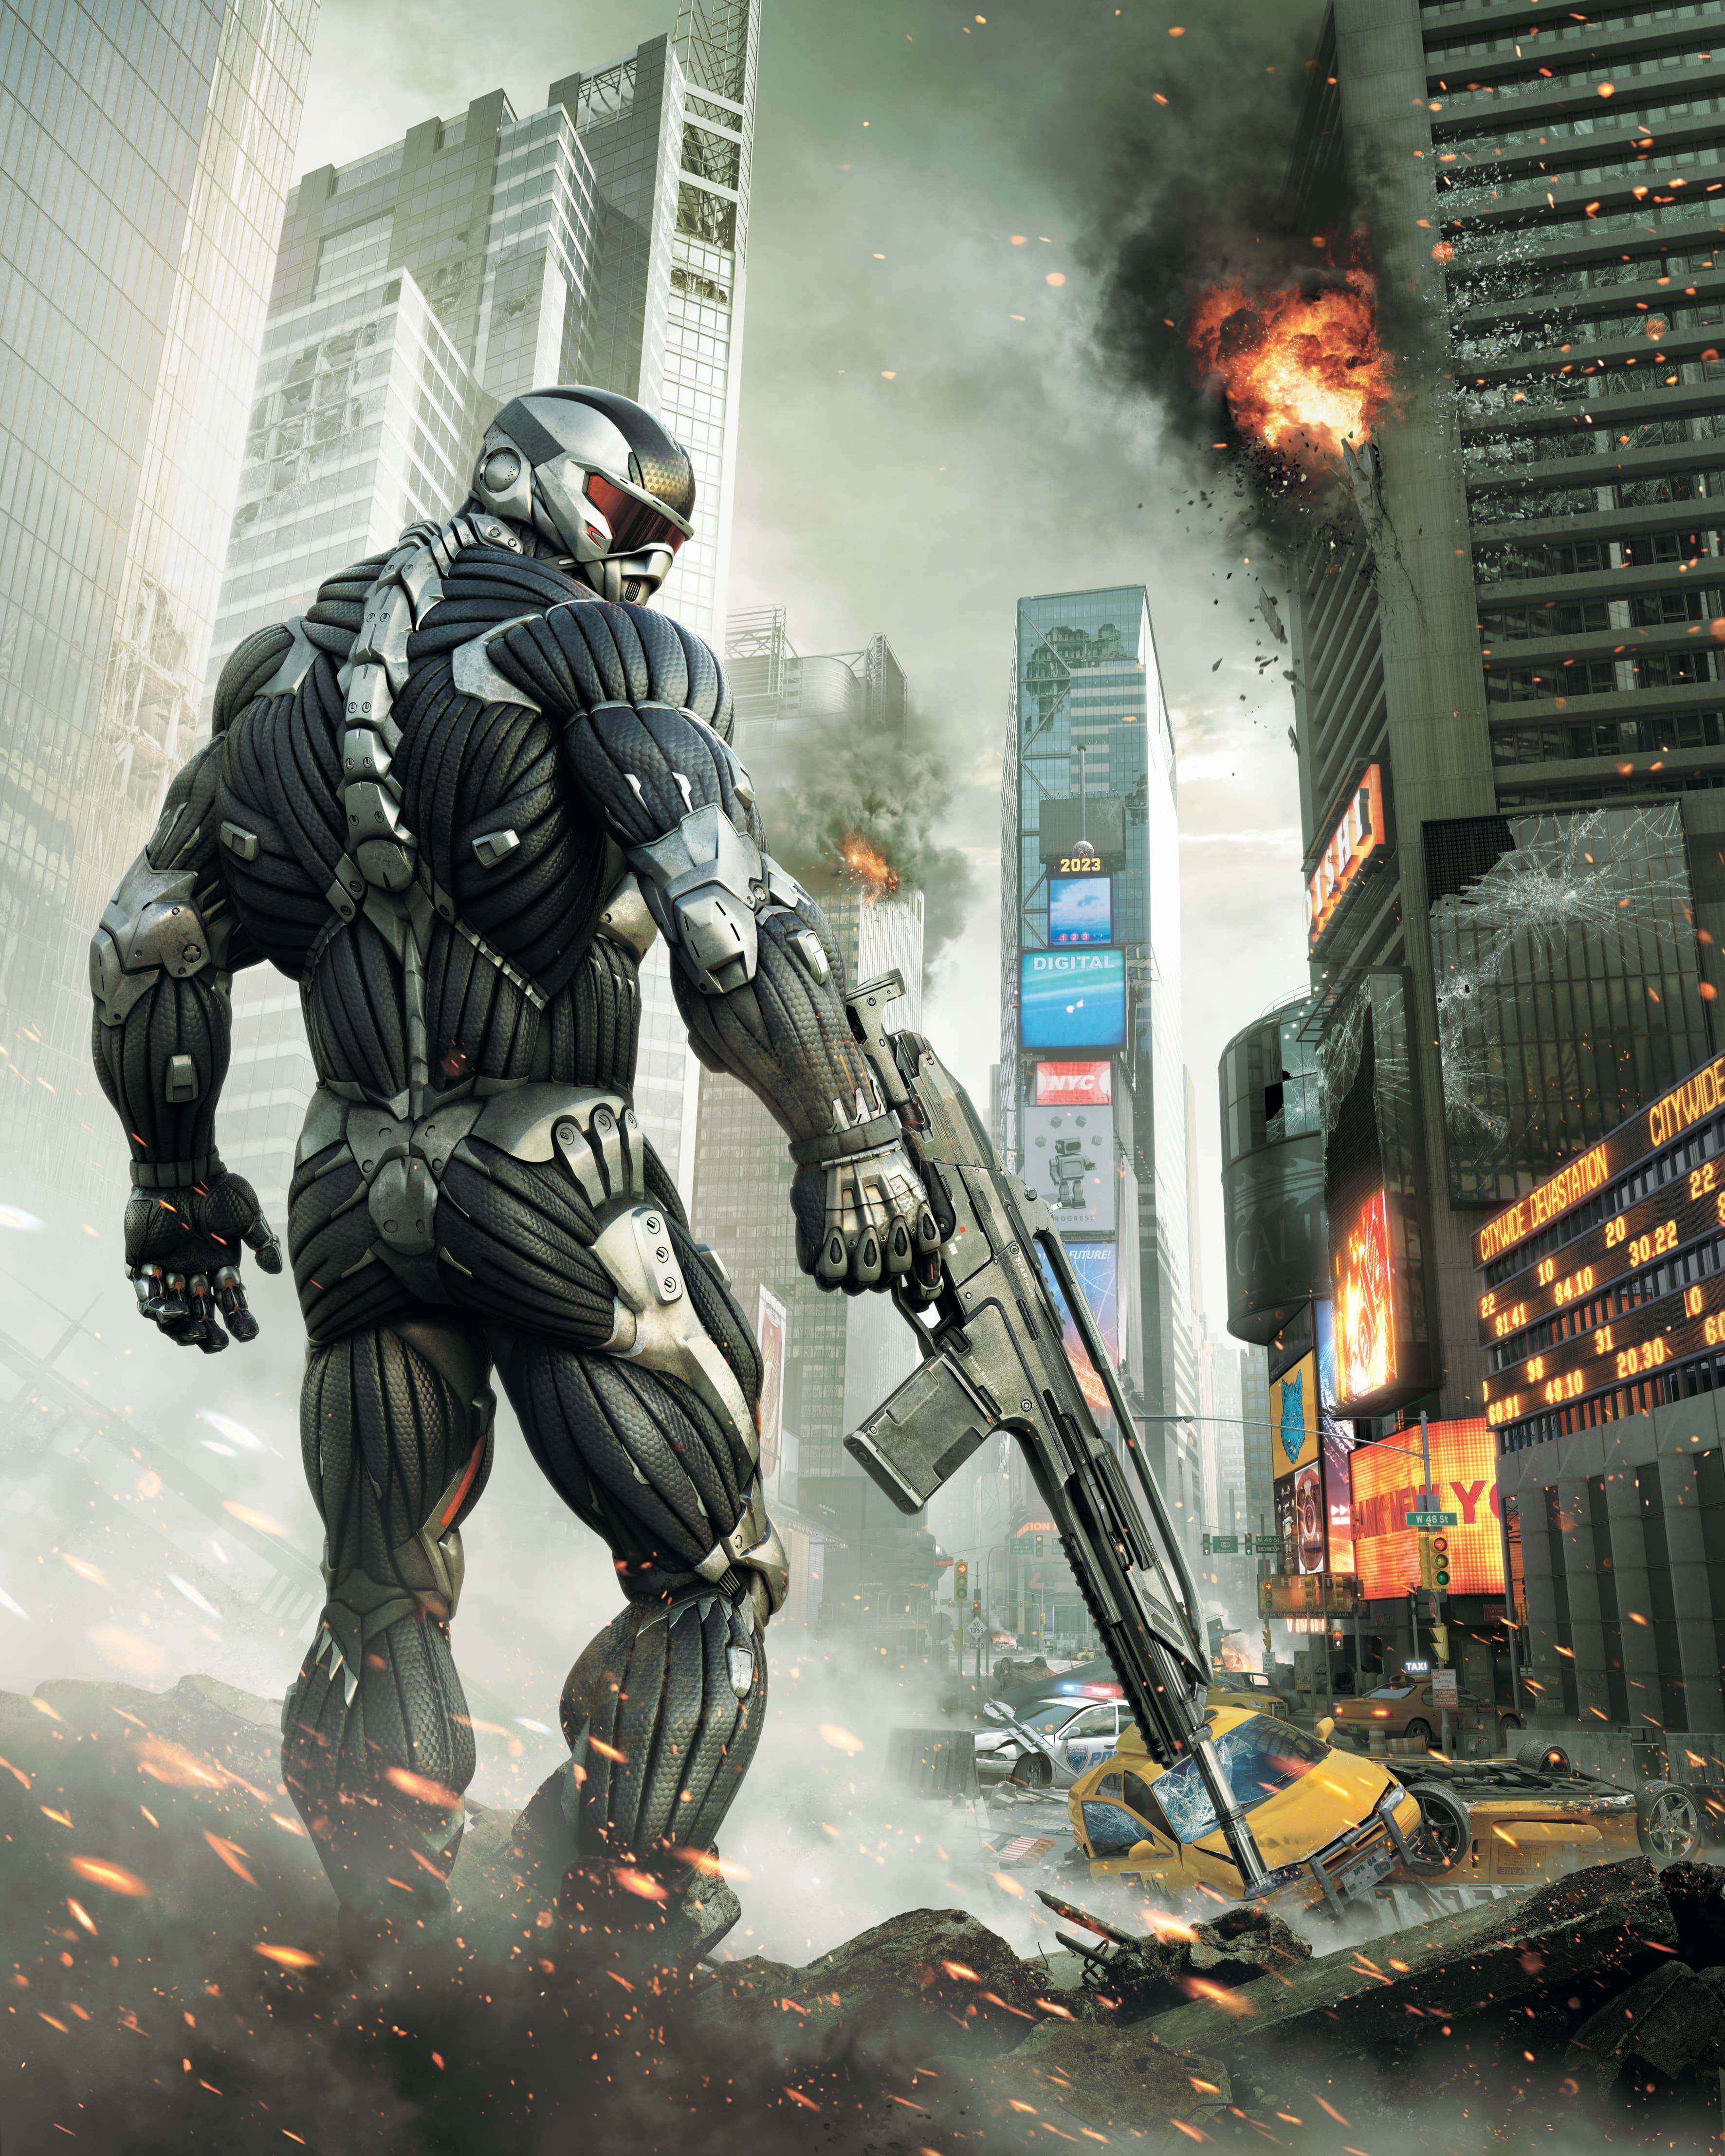 crysis 2 for pc